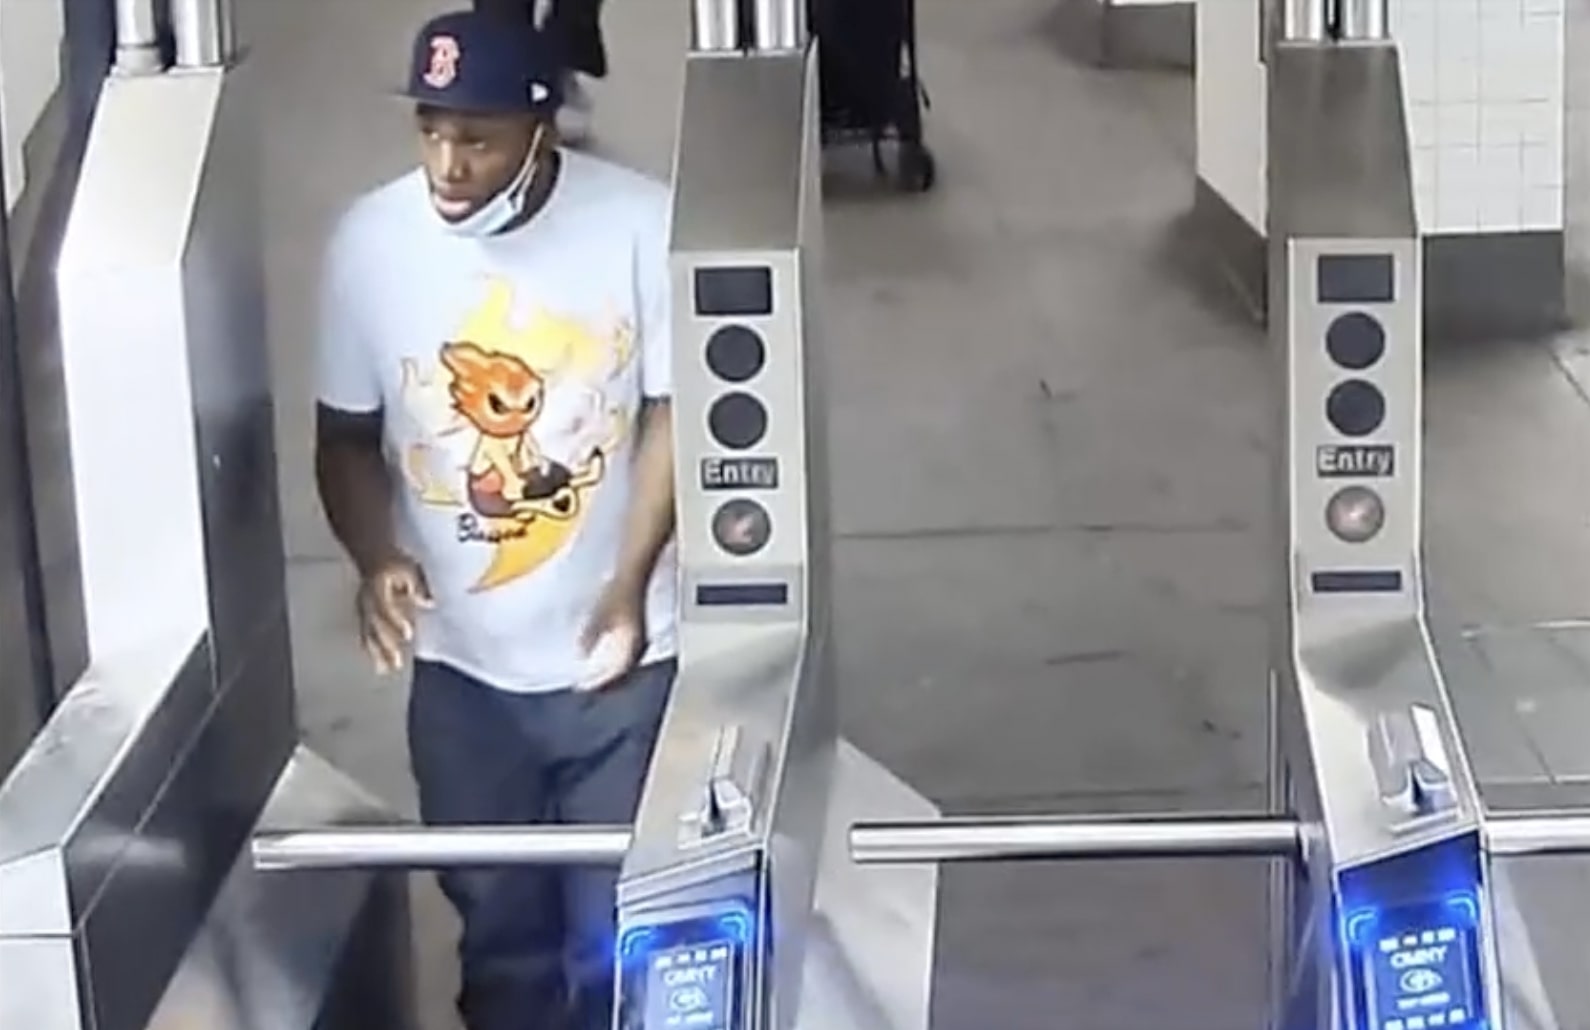 PHOTO: A suspect wanted in connection with subway assault incidents is seen in a video still released by The New York City Police Department on June 18, 2023.